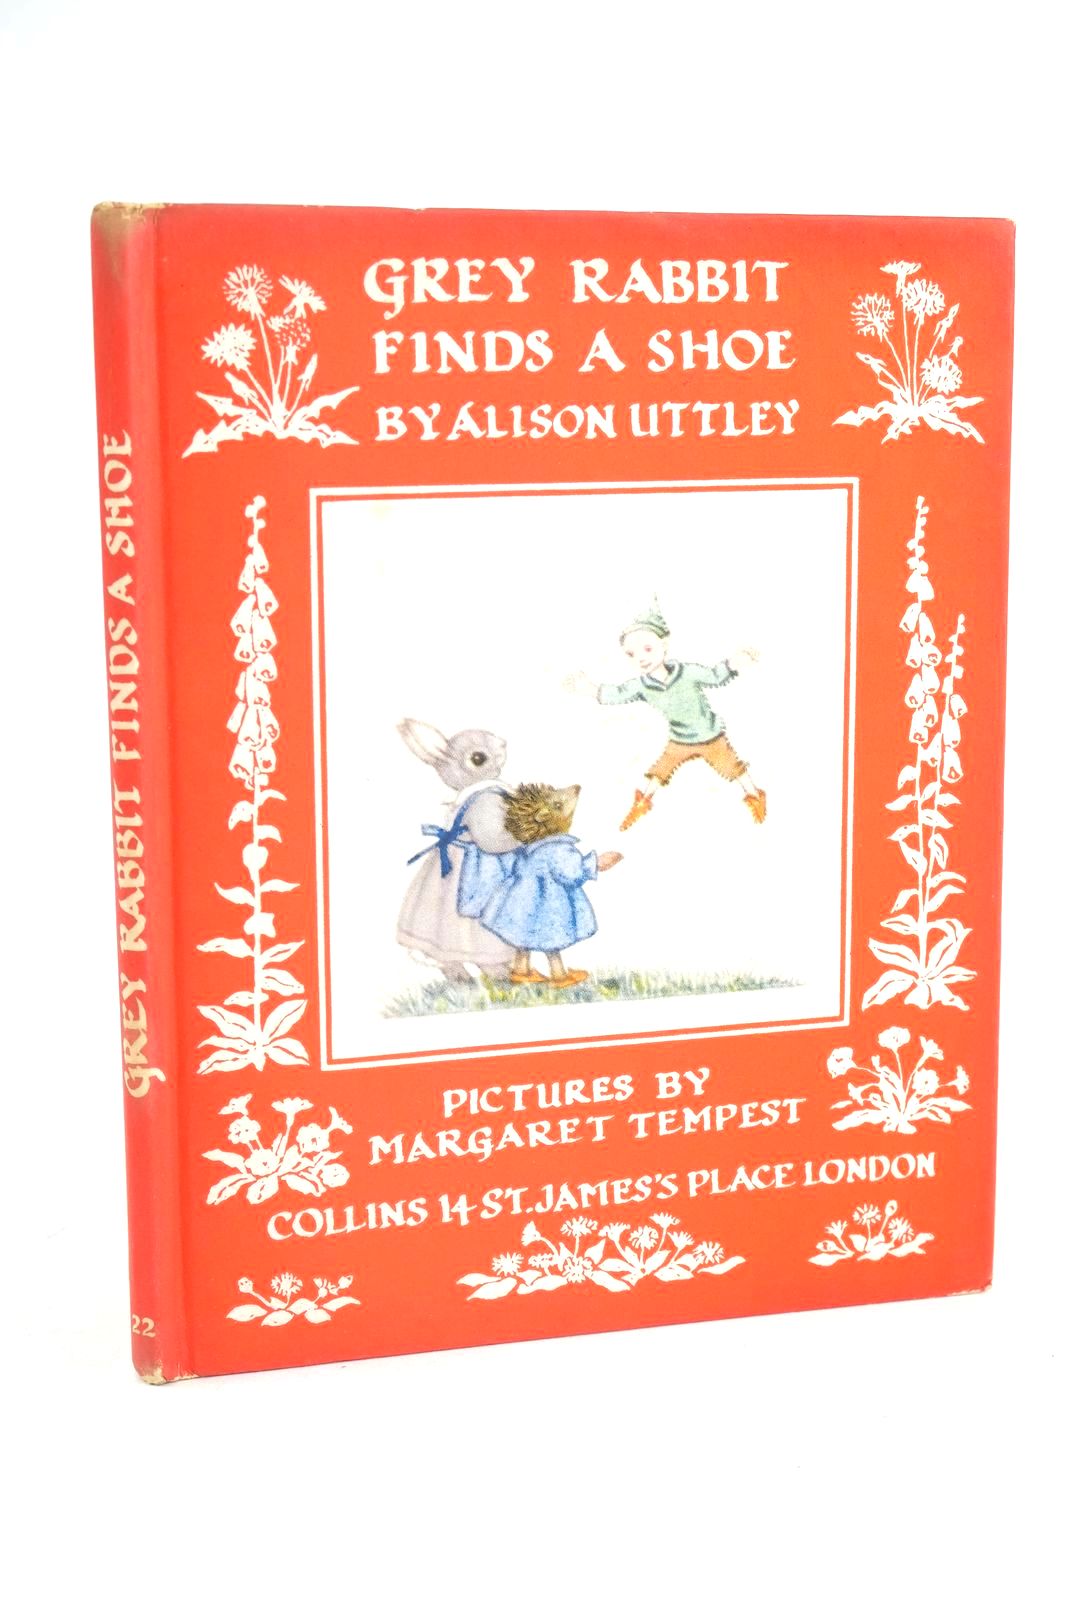 Photo of GREY RABBIT FINDS A SHOE written by Uttley, Alison illustrated by Tempest, Margaret published by Collins (STOCK CODE: 1325536)  for sale by Stella & Rose's Books